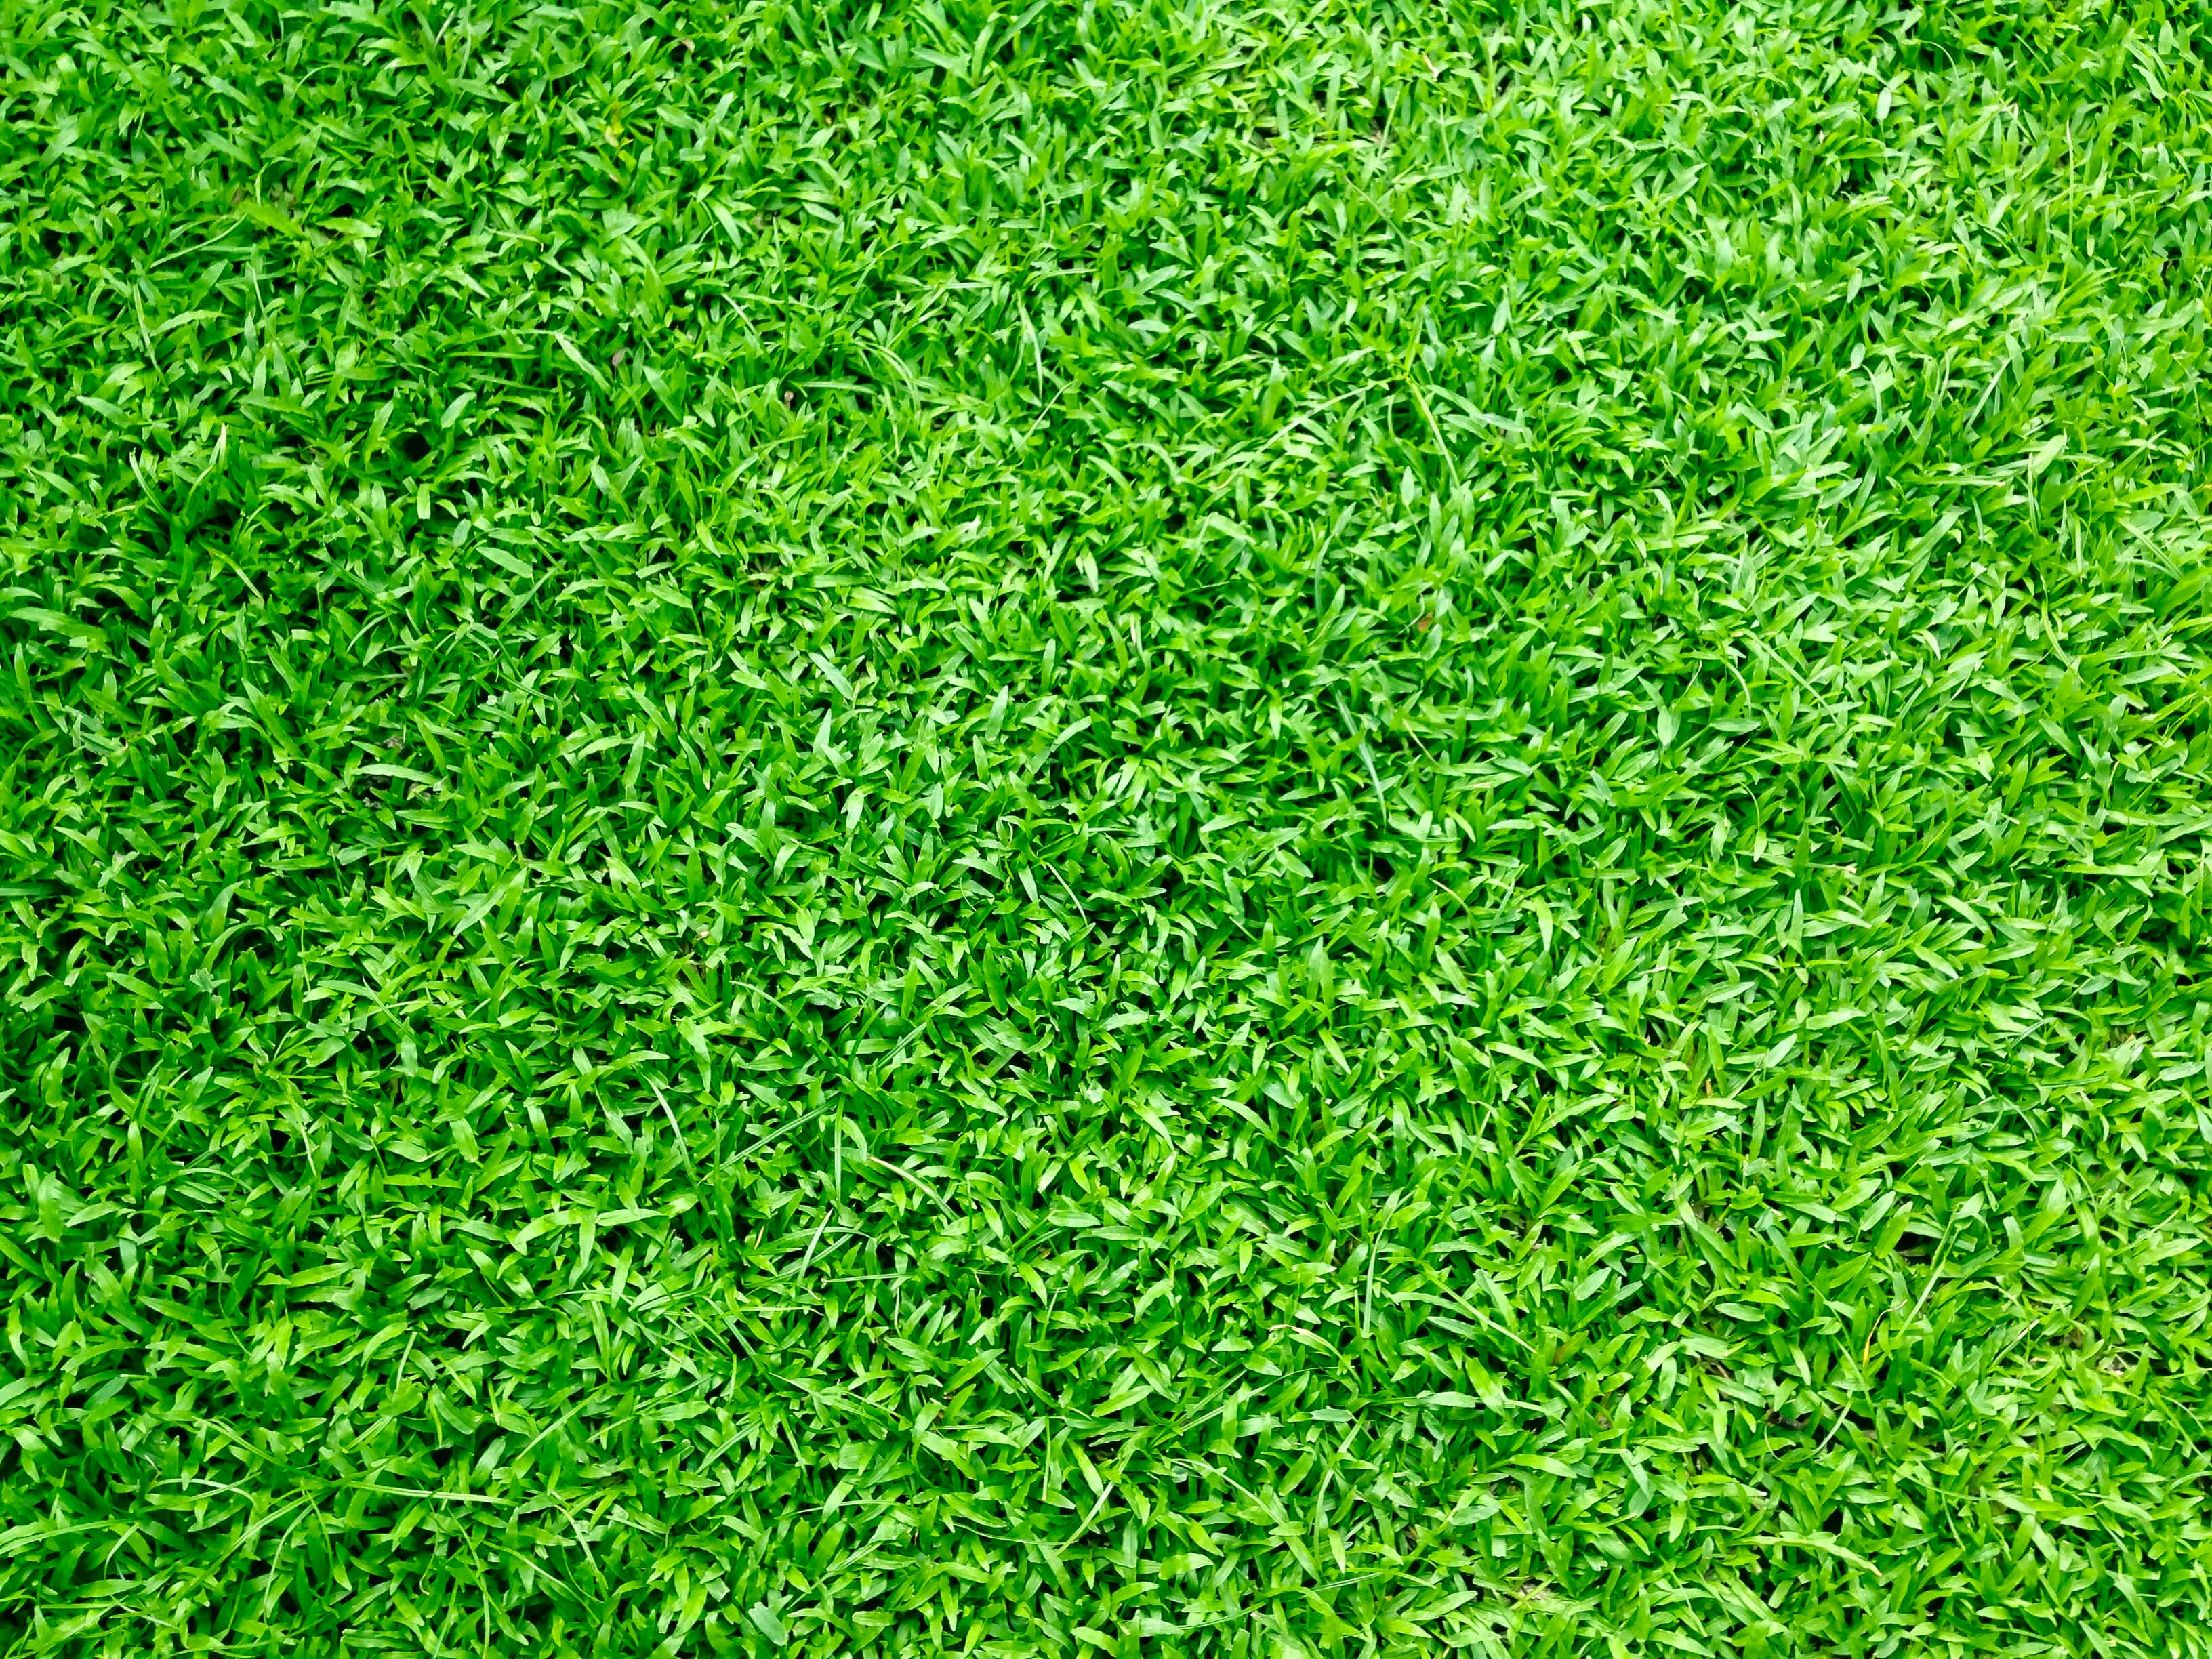 Appealing benefits of synthetic turf that you should know!